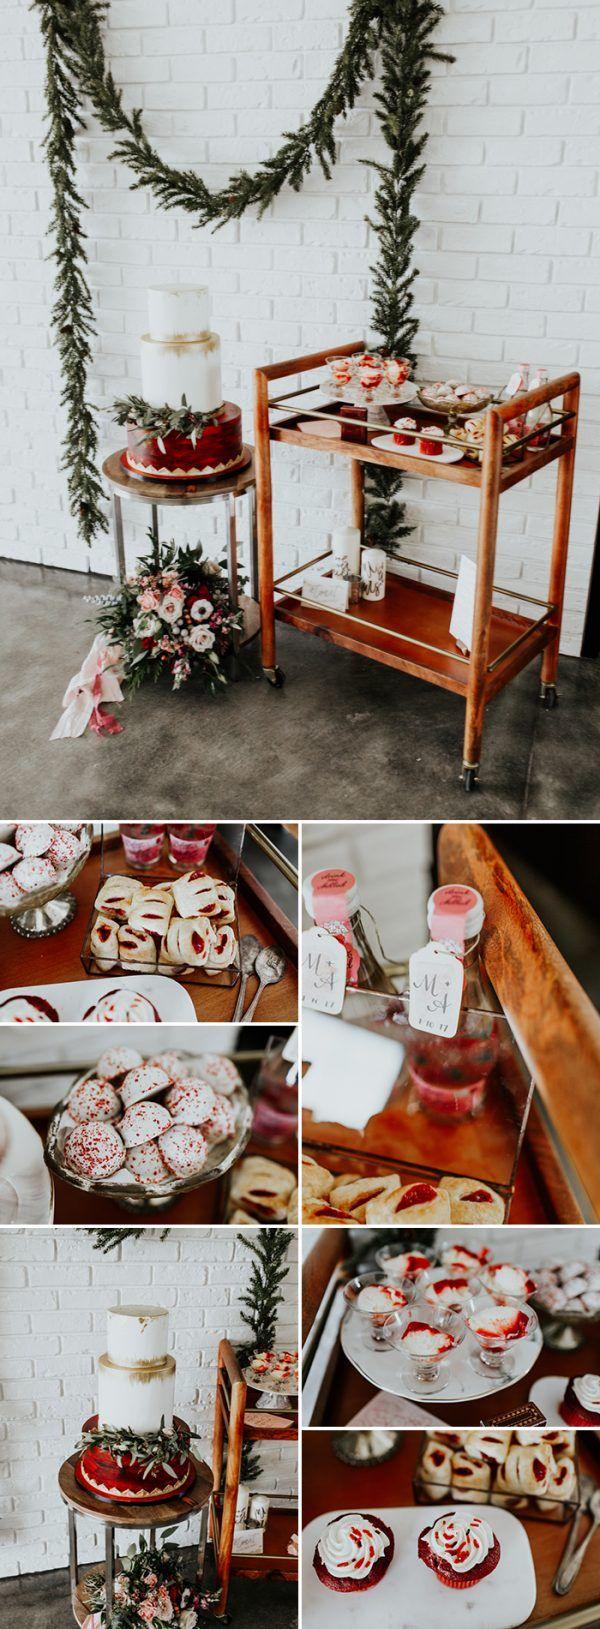 Hochzeit - Fall In Love With This Industrial Valentine's Wedding Inspiration